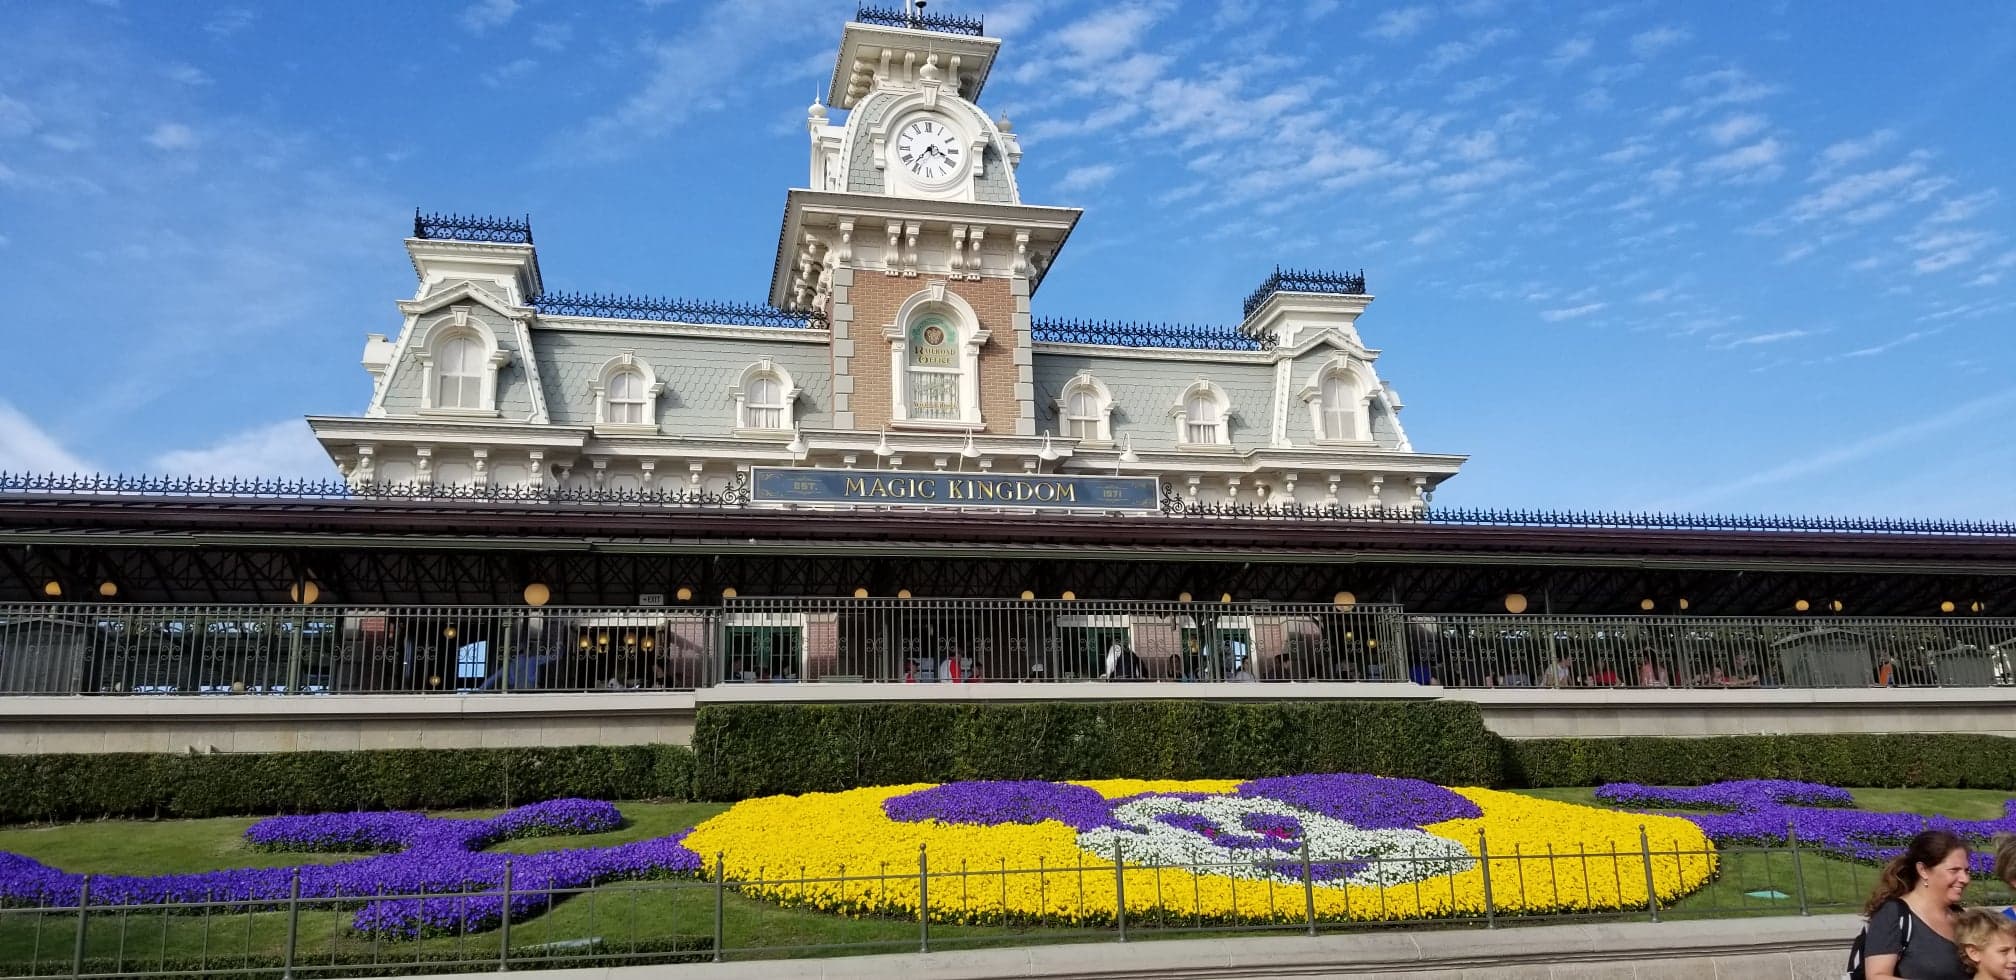 Extended Park Hours Coming to Magic Kingdom This Spring